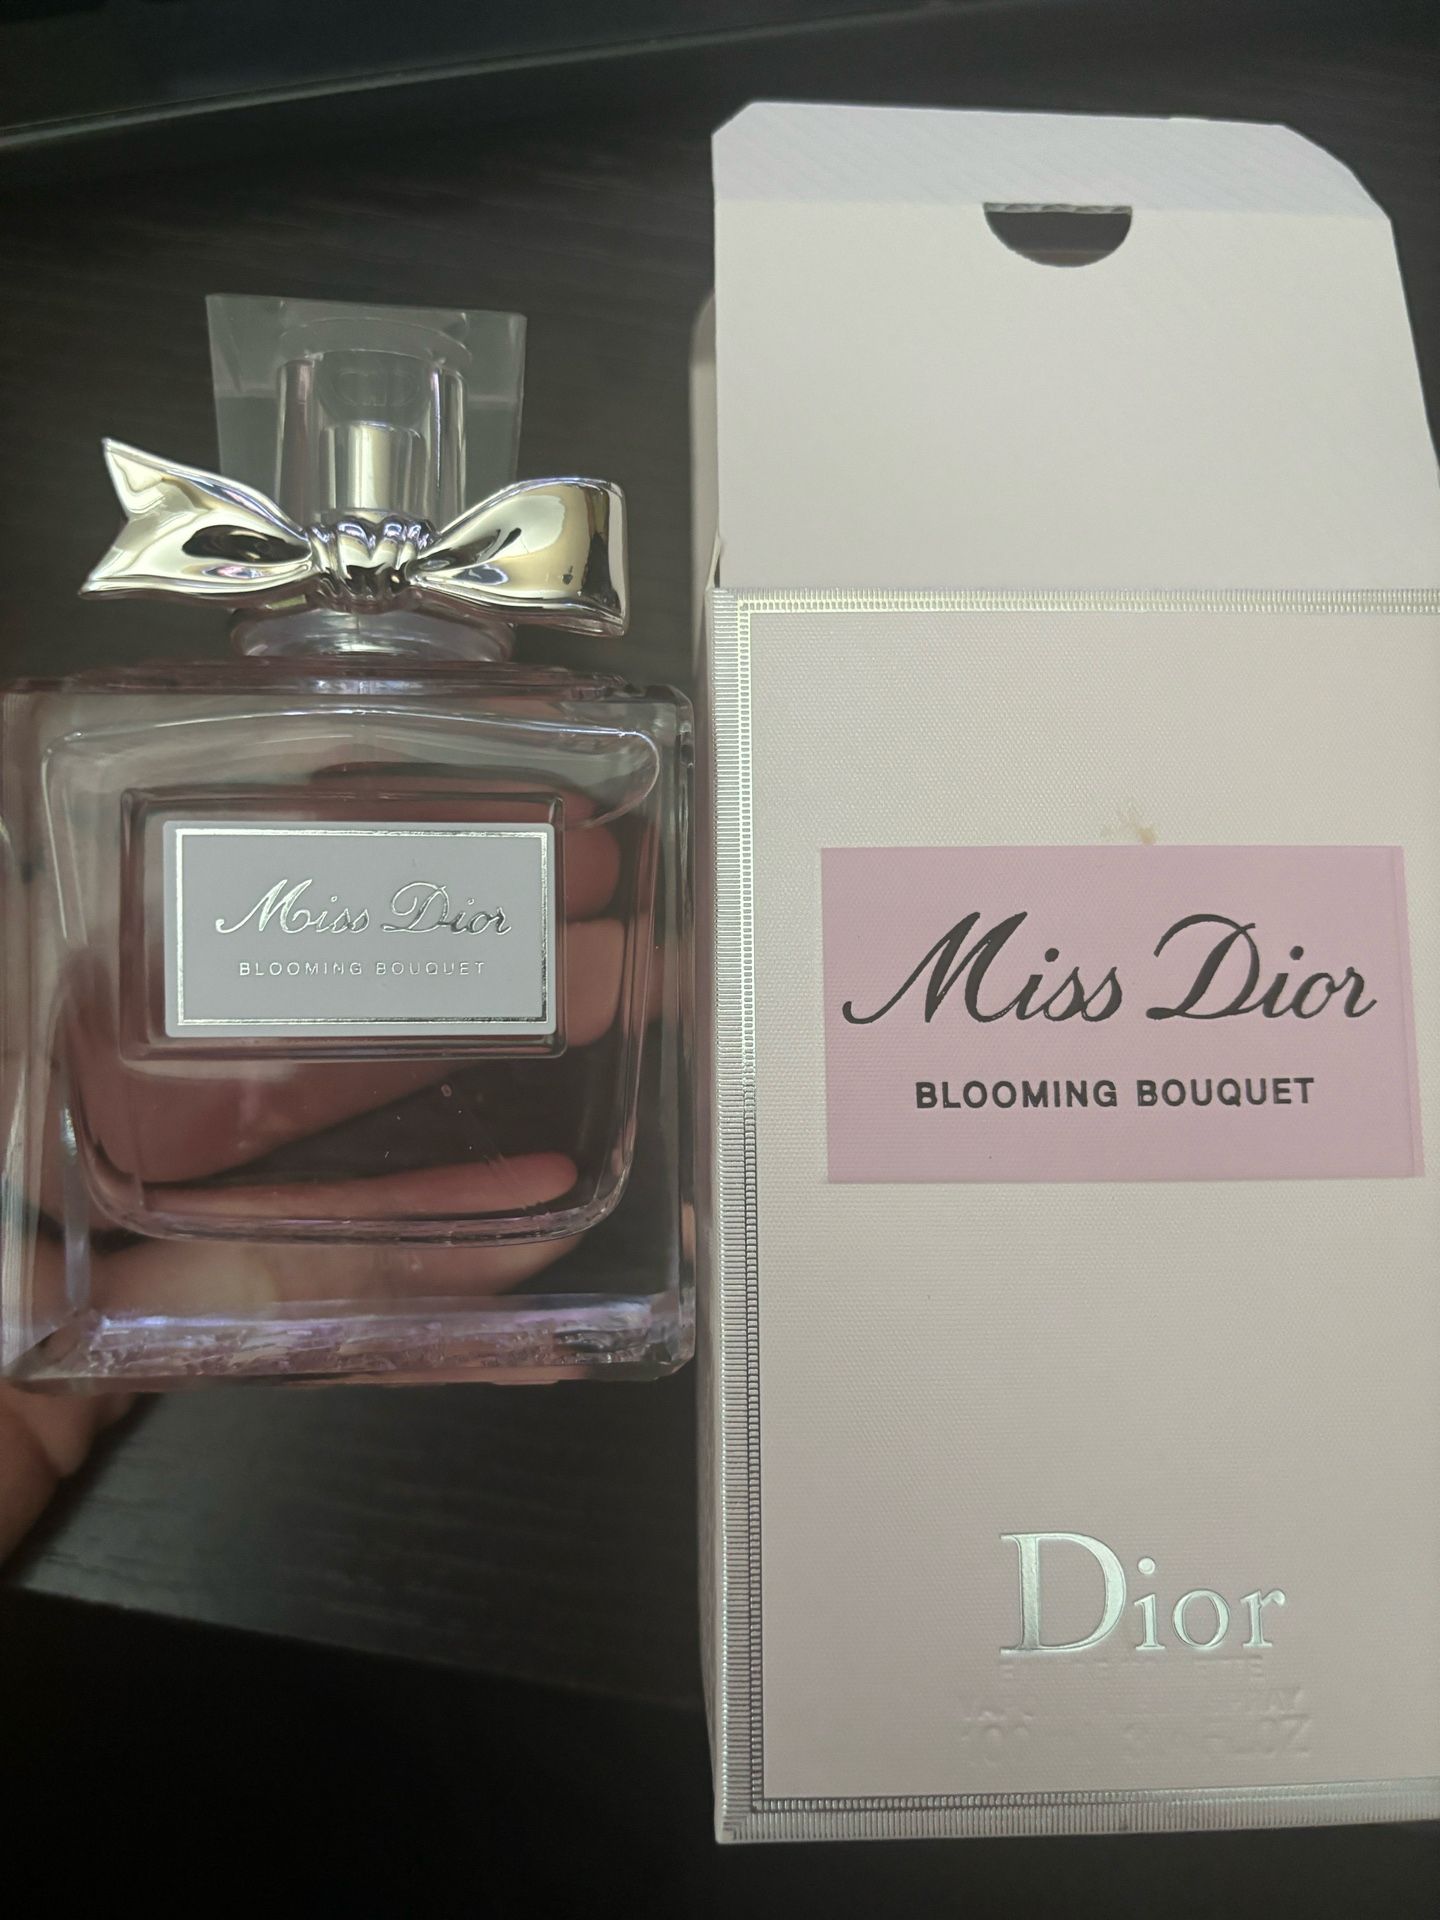 Miss Dior Blooming Bouquet 3.4 fl oz - New in Box